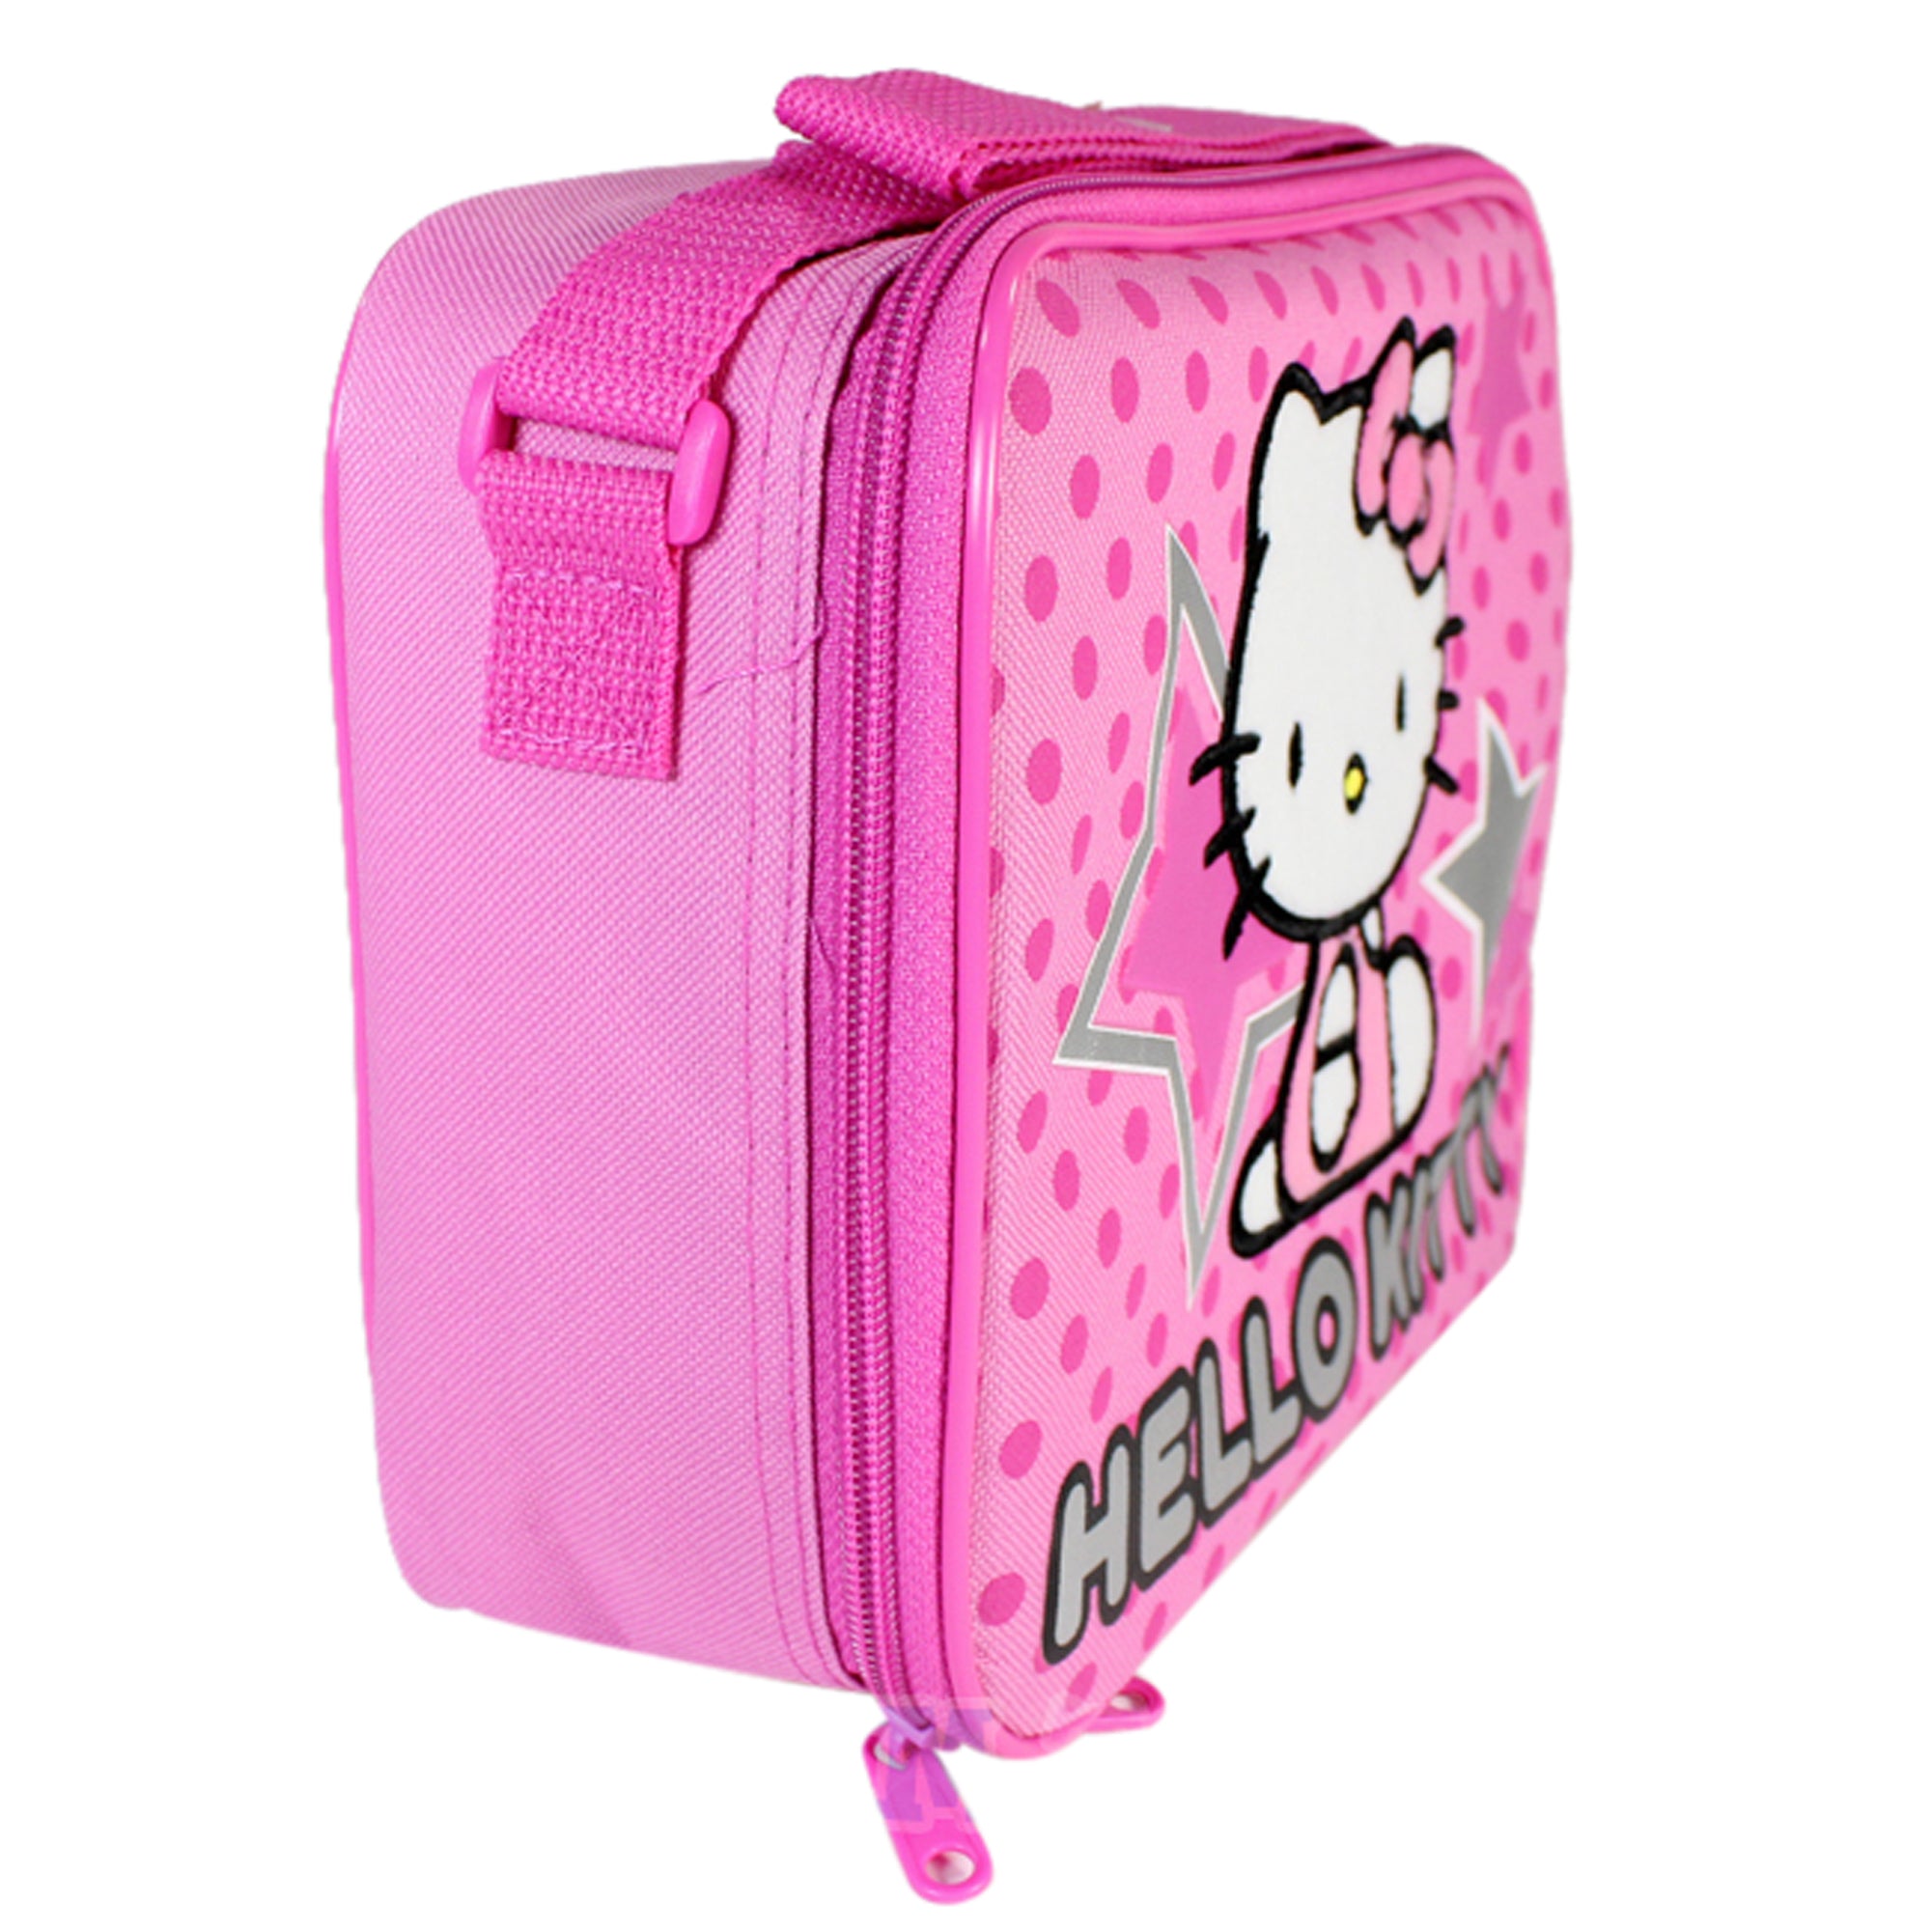 Lunch Bag - Hello Kitty - Pink Star and Dots New Case Girls Gifts Licensed 81401 - image 2 of 4